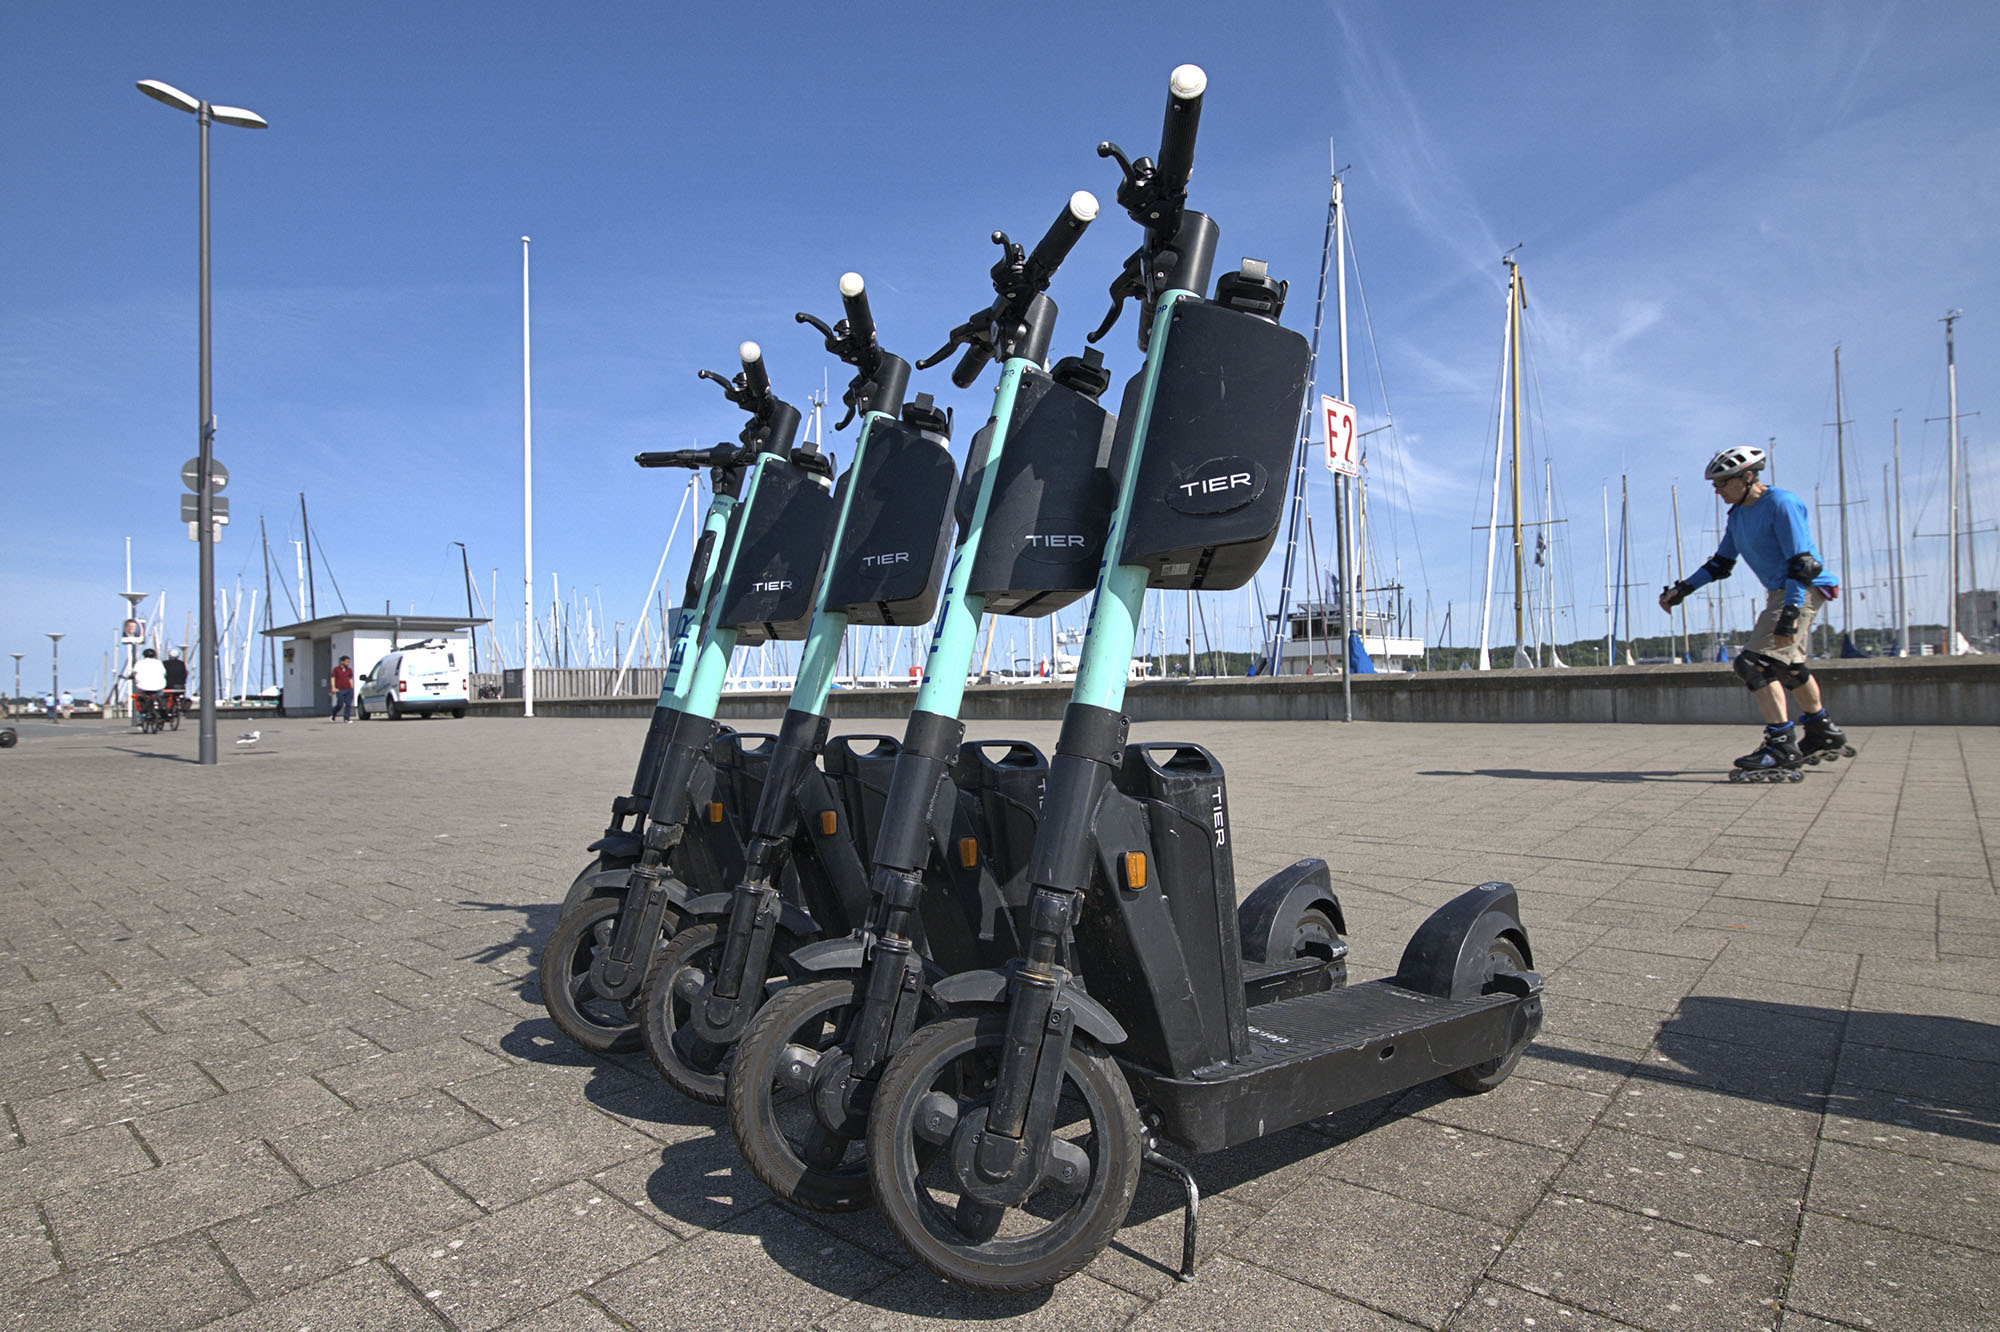 Kiel, parked e-scooter from the provider TIER (Tier Mobility GmbH) on the keel line. After use, the e-scooters can be parked in parking zones that the customer can find via the app. Often, however, the scooters also stop or lie in other places. Employees of the rental company then collect the e-scooters and recharge the batteries. +++ For editorial use only +++ Only for editorial use +++ (Torsten Sukrow, AFP)